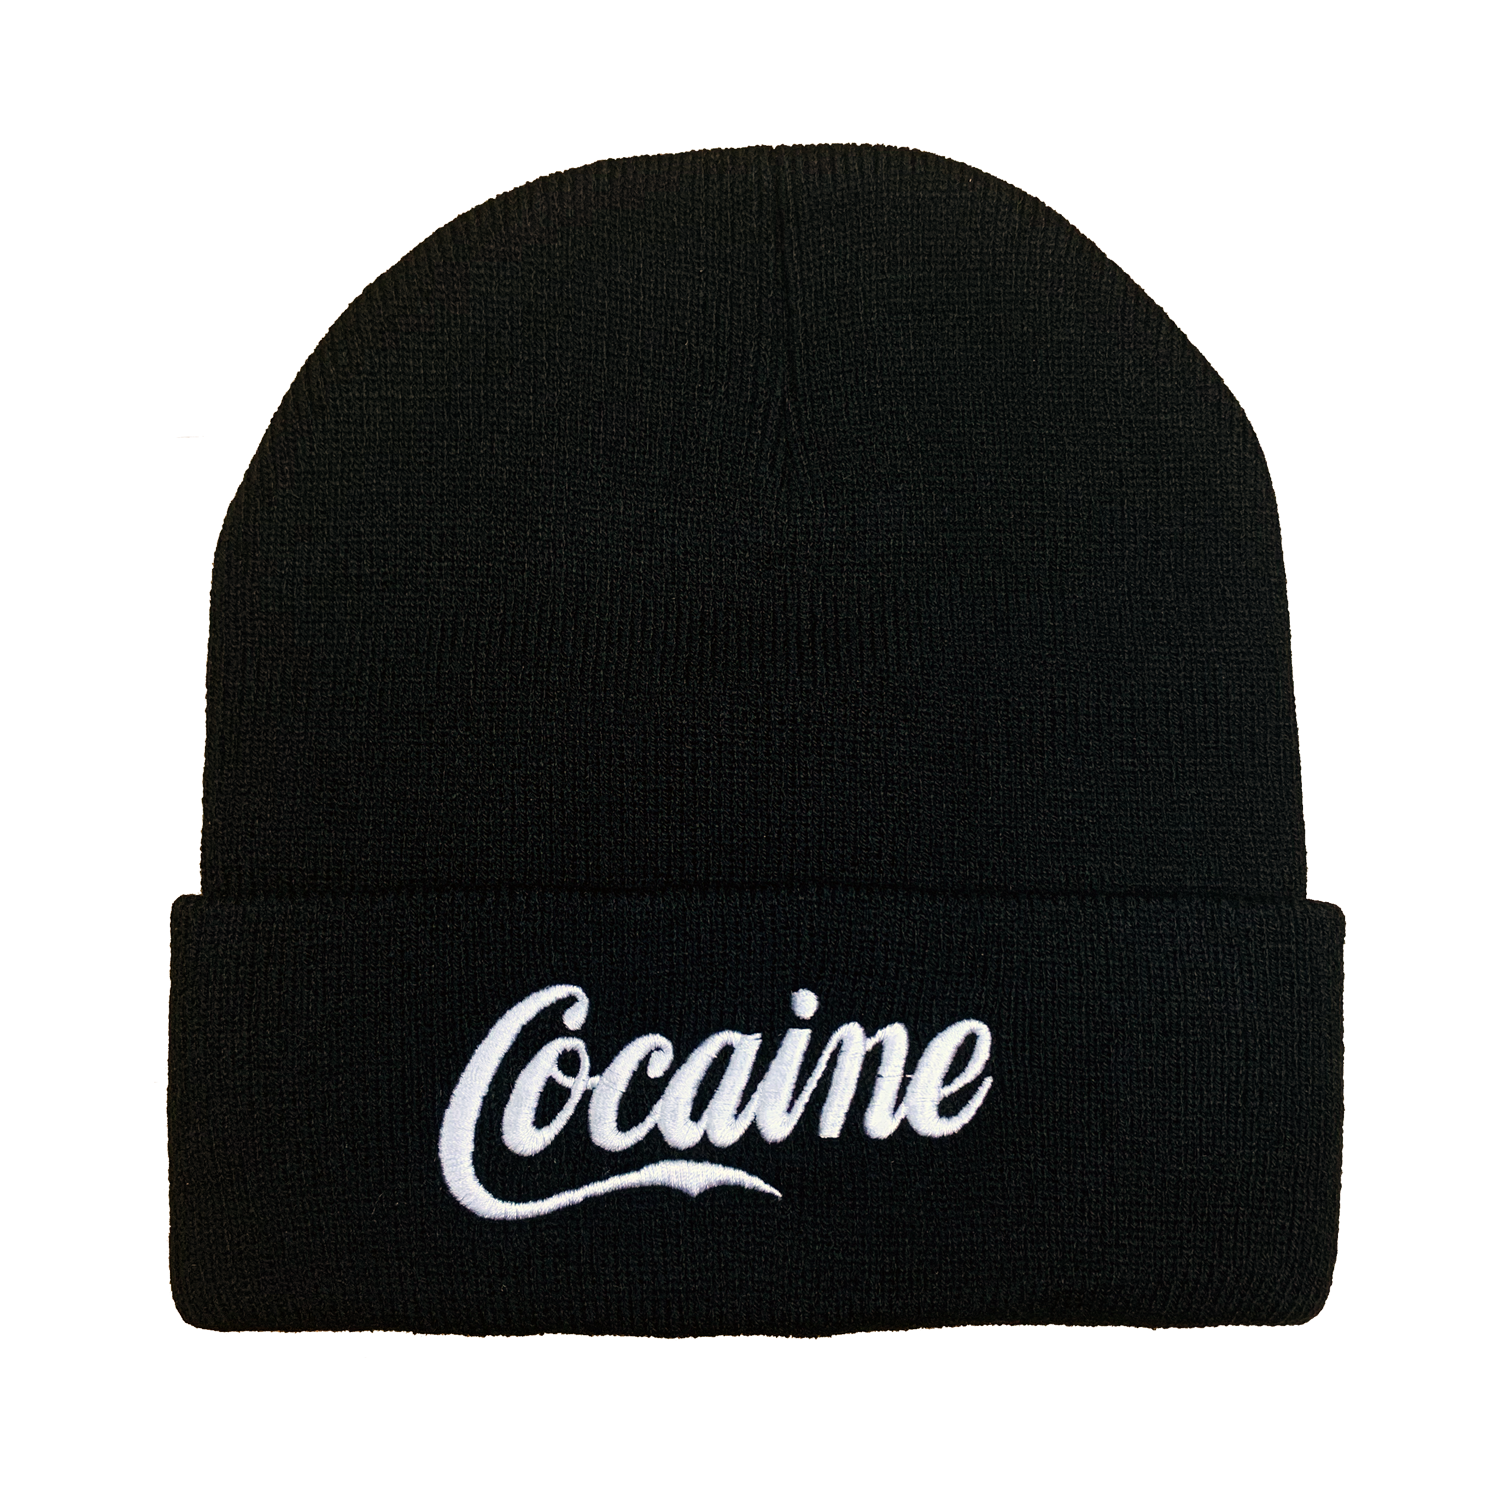 Cocaine Embroidered Beanie - UNMASKED Horror & Punk Patches and Decor